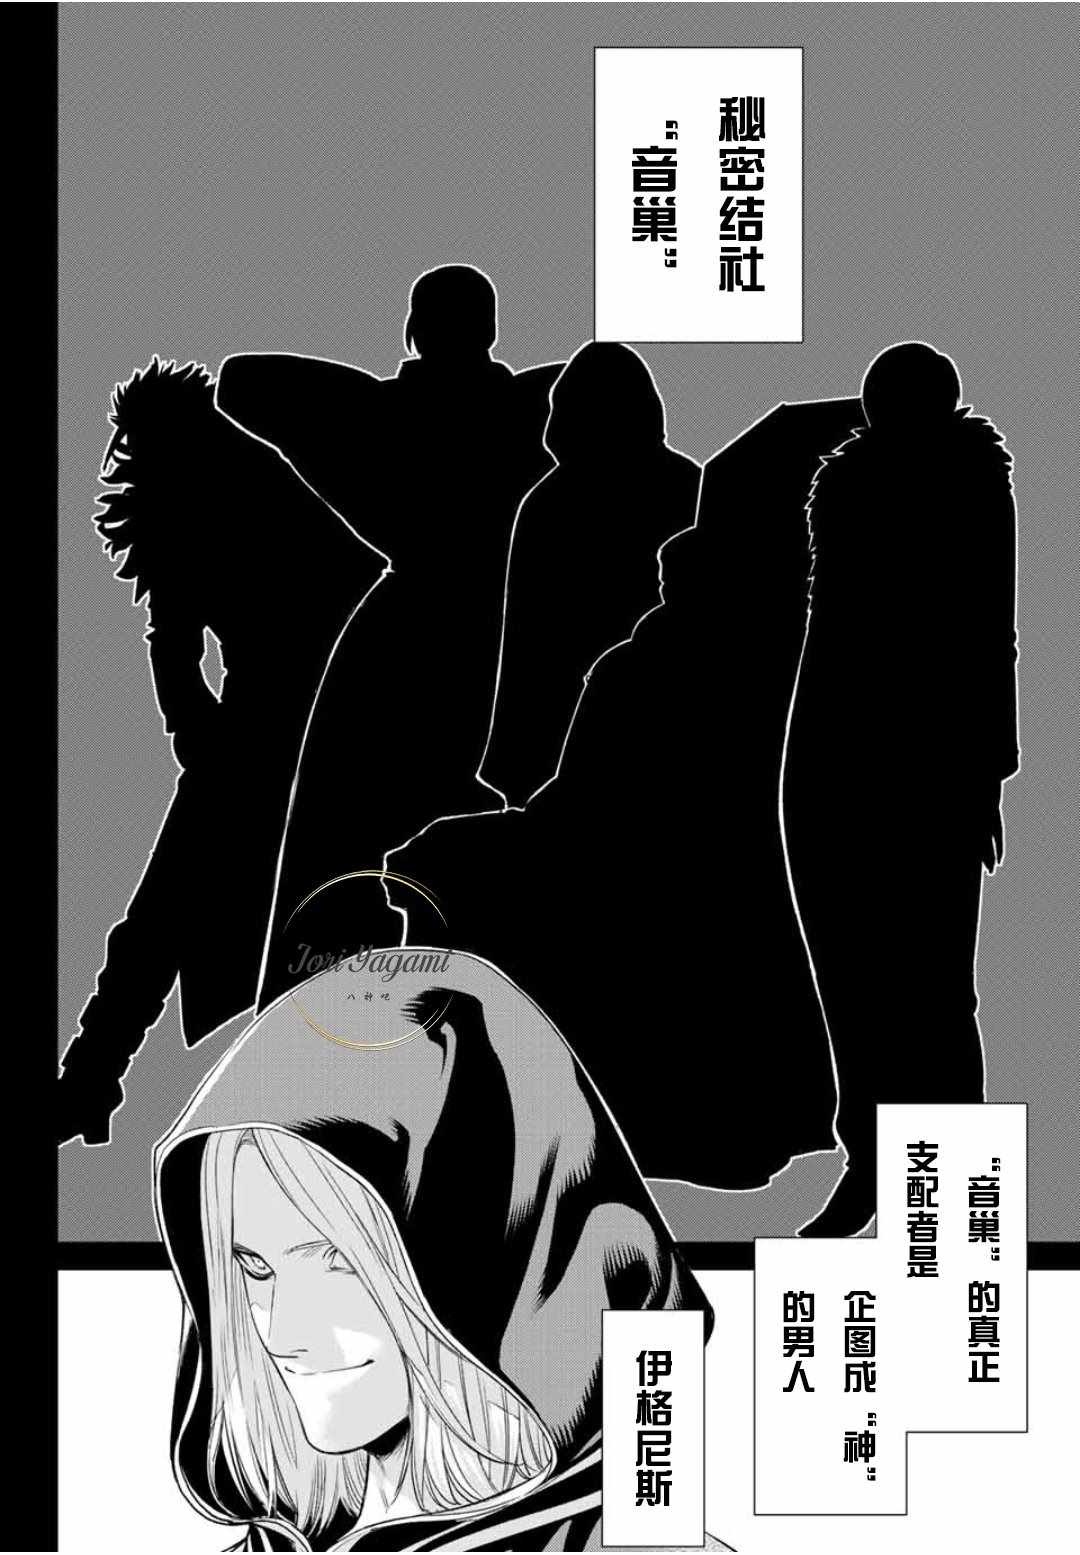 《THE KING OF FIGHTERS～A NEW BEGINNING～》漫画 ANEWBEGINNING 029话